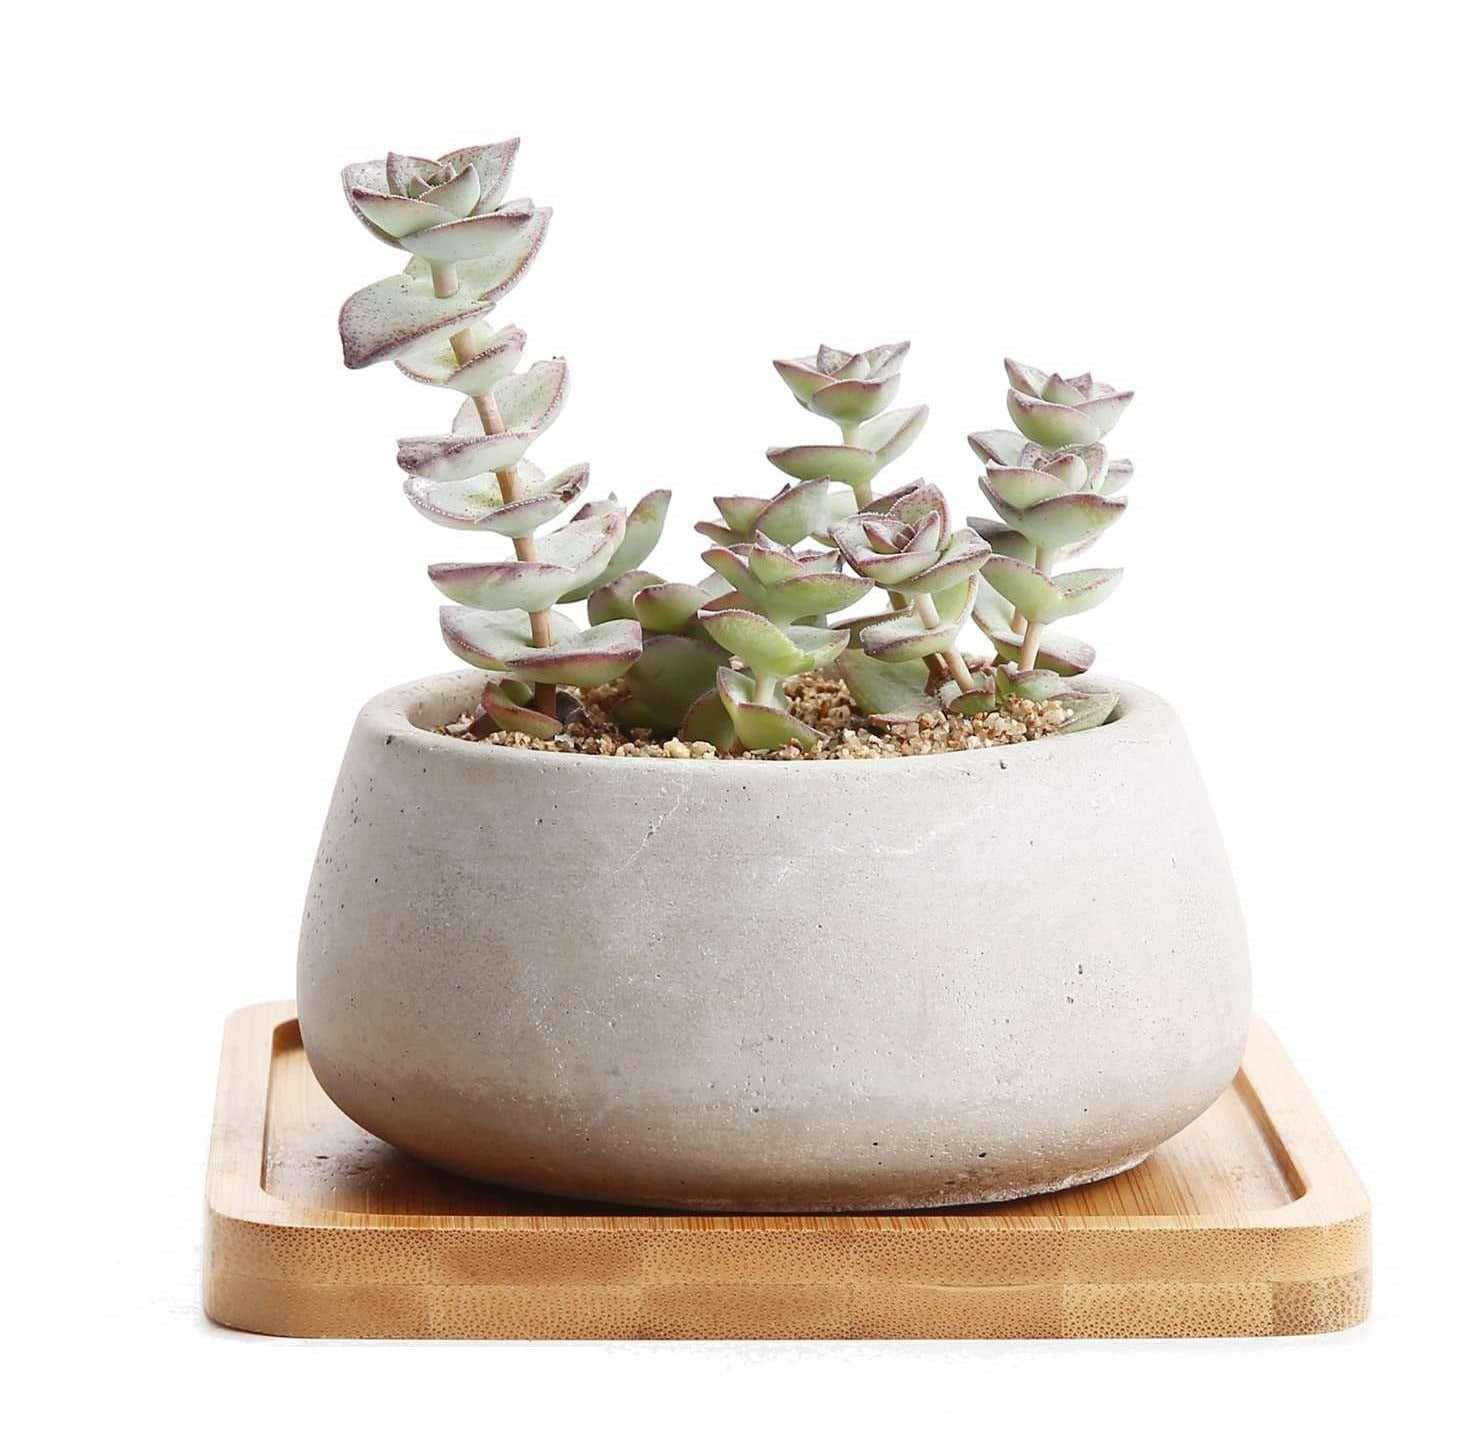 T4U 2.5 Inch Cement Serial Small Round Sucuulent Cactus Plant Pots Flower Pots Planters Containers Window Boxes with Bamboo Tray Grey Pack of 2